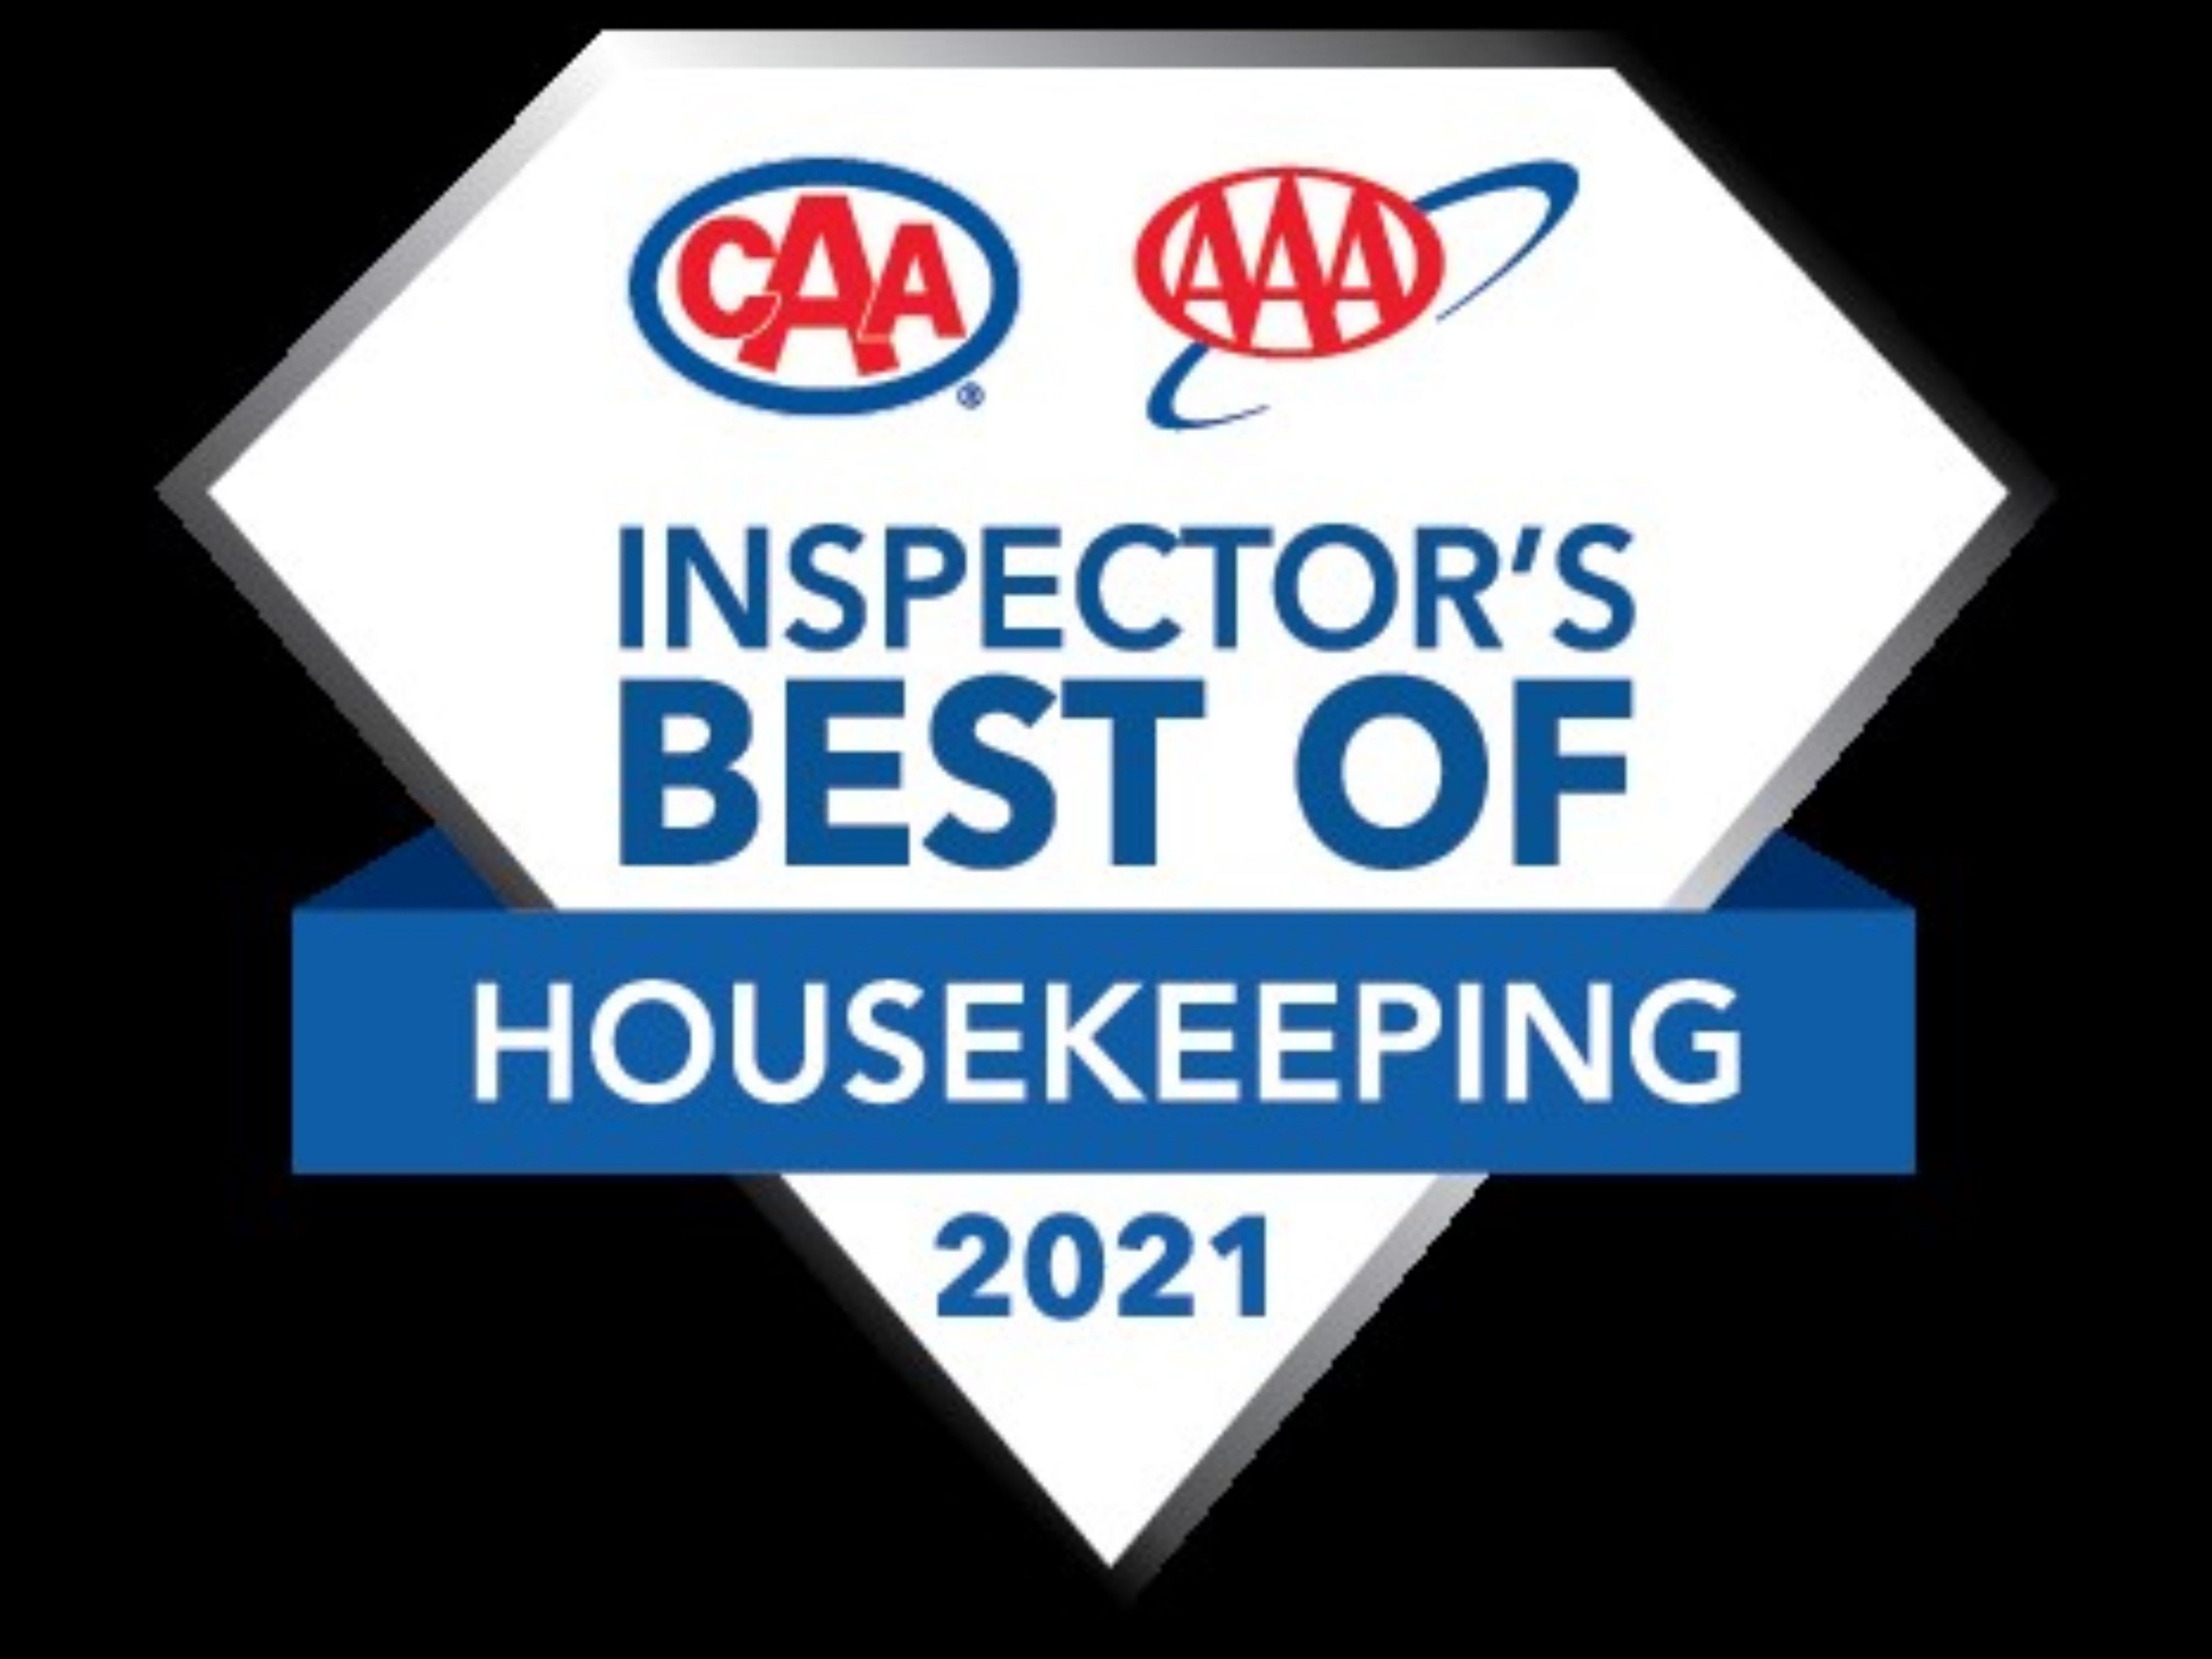 Holiday Inn & Suites Kamloops has been recognized with the 2021 CAA/AAA Inspector’s Best Of Housekeeping award, granted to hotels throughout the United States, Canada, Mexico and the Caribbean that earn  the highest possible cleanliness and condition scores.  